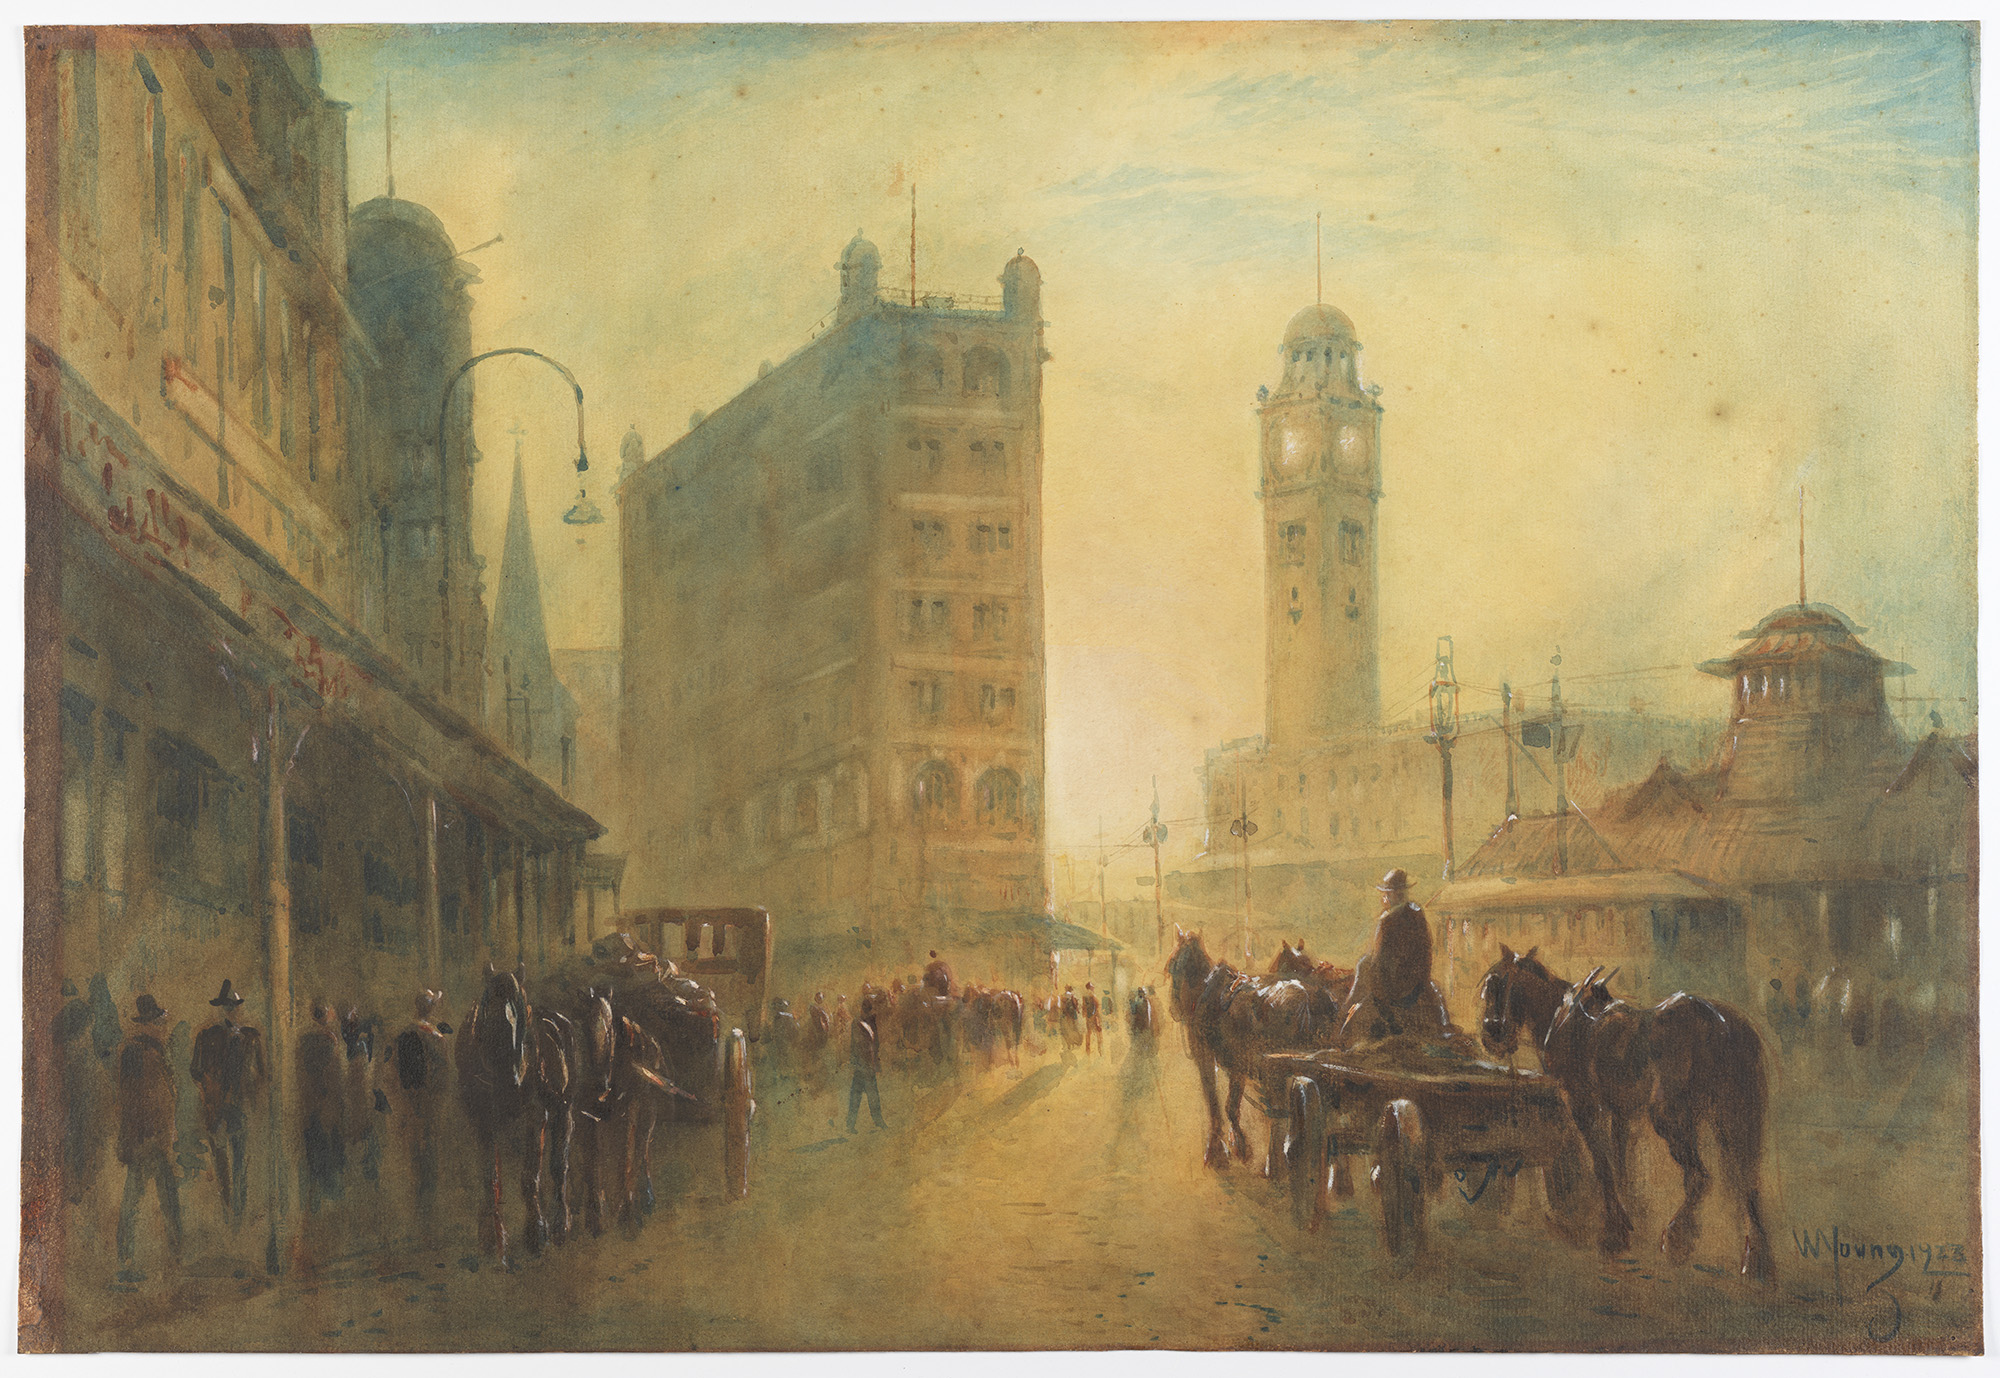 A watercolour painting of Railway Square - the clock tower can be seen in the morning light. A horse and carriage in the foreground. 